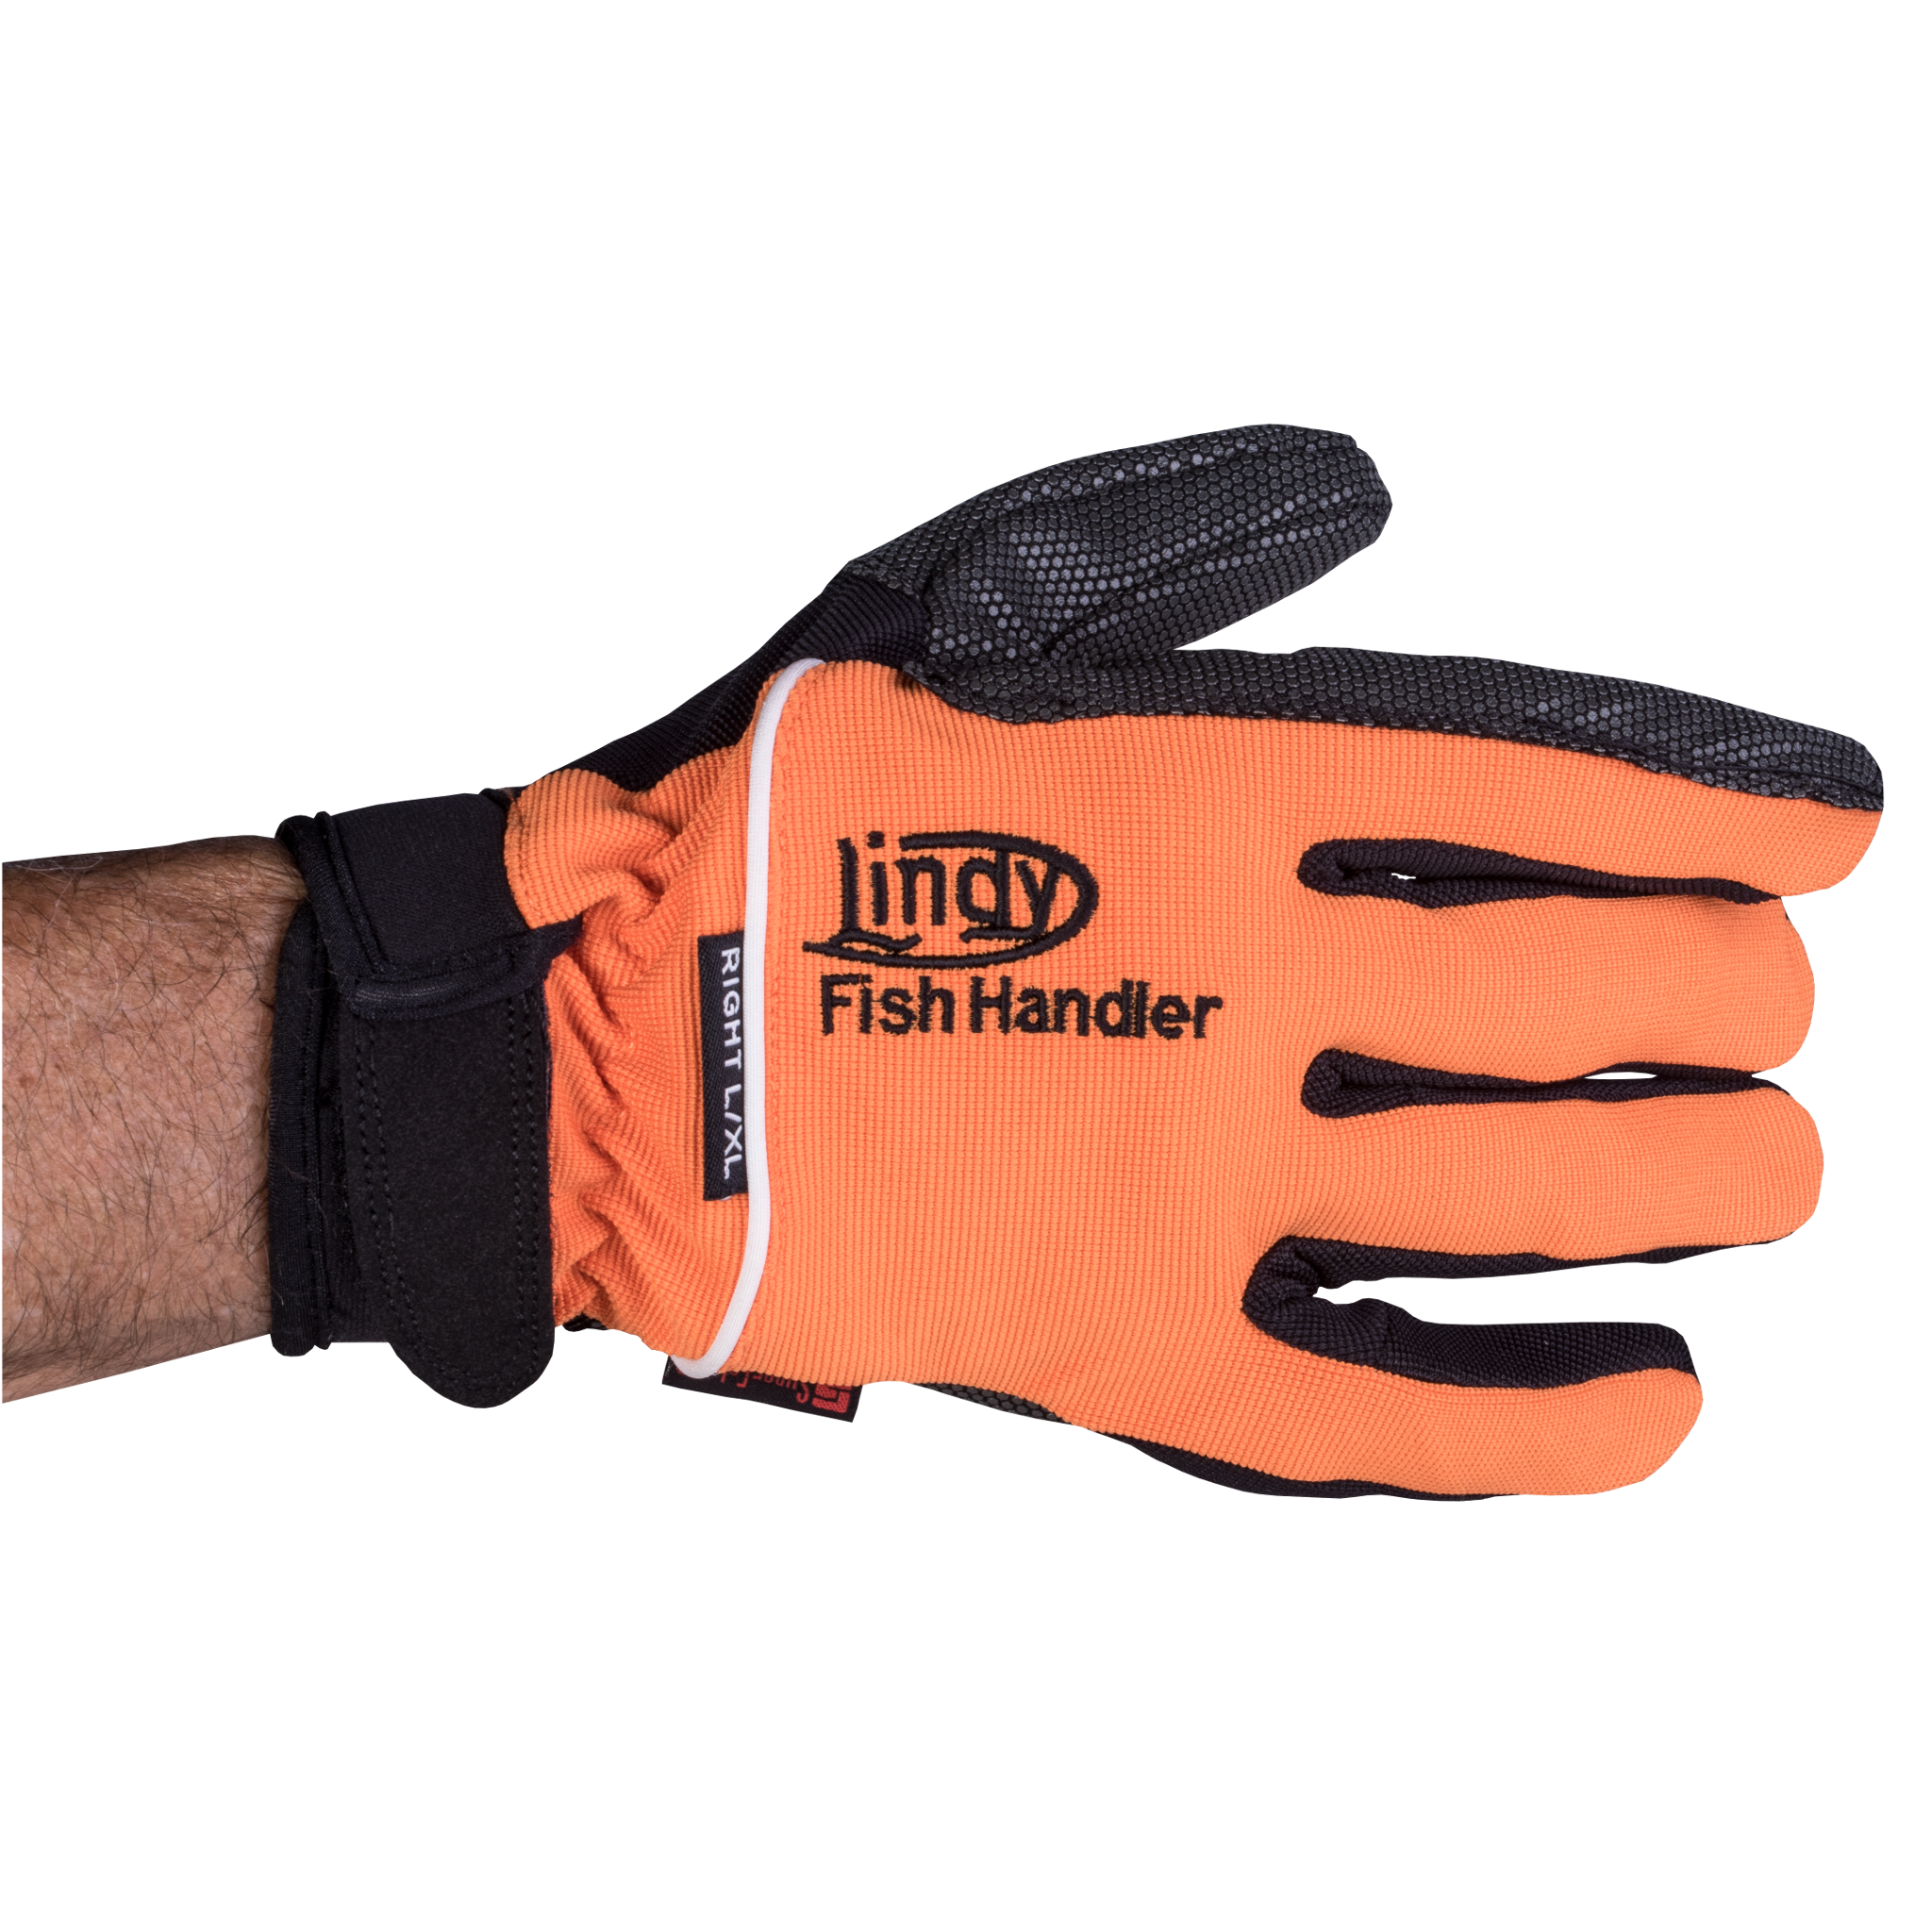 https://mcproductimages.s3-us-west-2.amazonaws.com/lindy/lindy-%20Fish-Handling-Glove-Orange/AC951.png